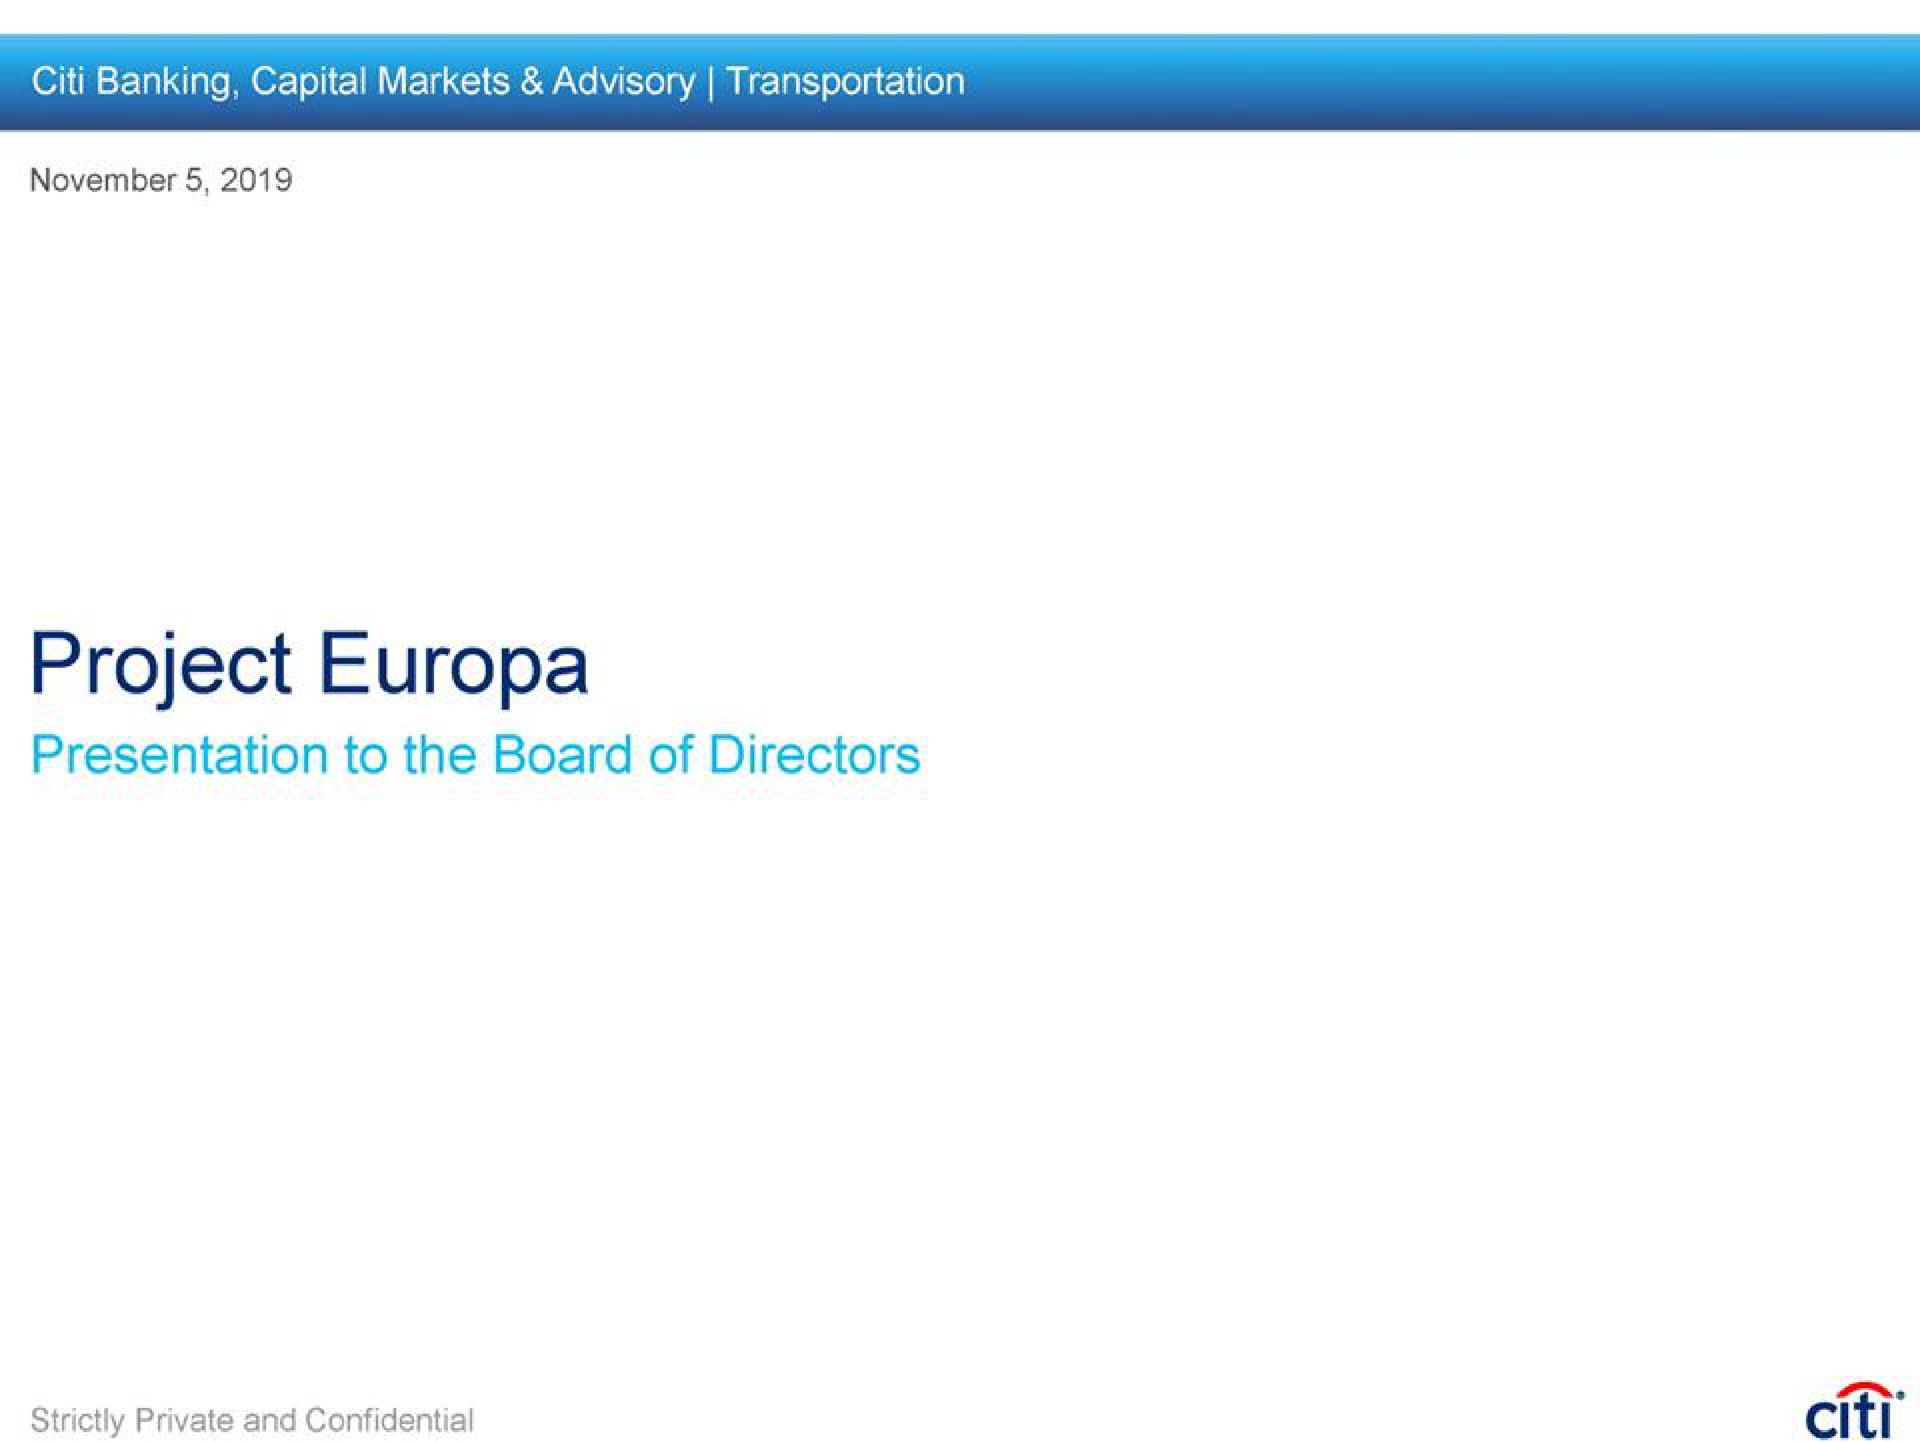 banking capital markets advisory transportation project presentation to the board of directors strictly private and confidential | Citi